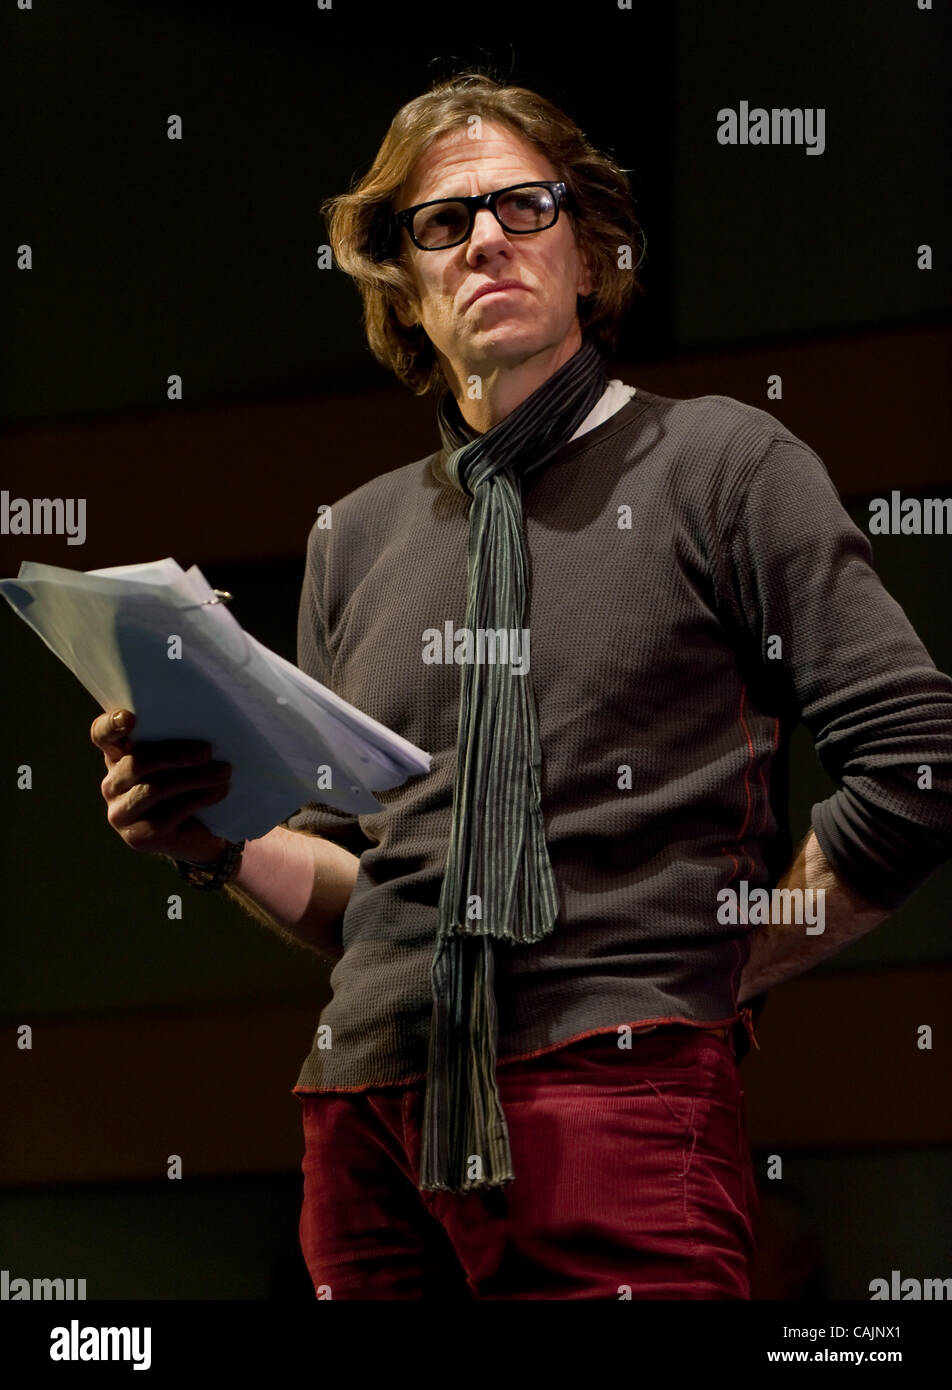 Jan. 12, 2011 - Los Angeles, California, USA -  Cast member SIMON TEMPLEMAN at the tech rehearsal at Skirball Cultural Center for the L.A. Theatre Works radio production of 'The School For Scandal' by playwright Brinsley Sheridan.  LA Theater Works is a non-profit media arts organization which prese Stock Photo